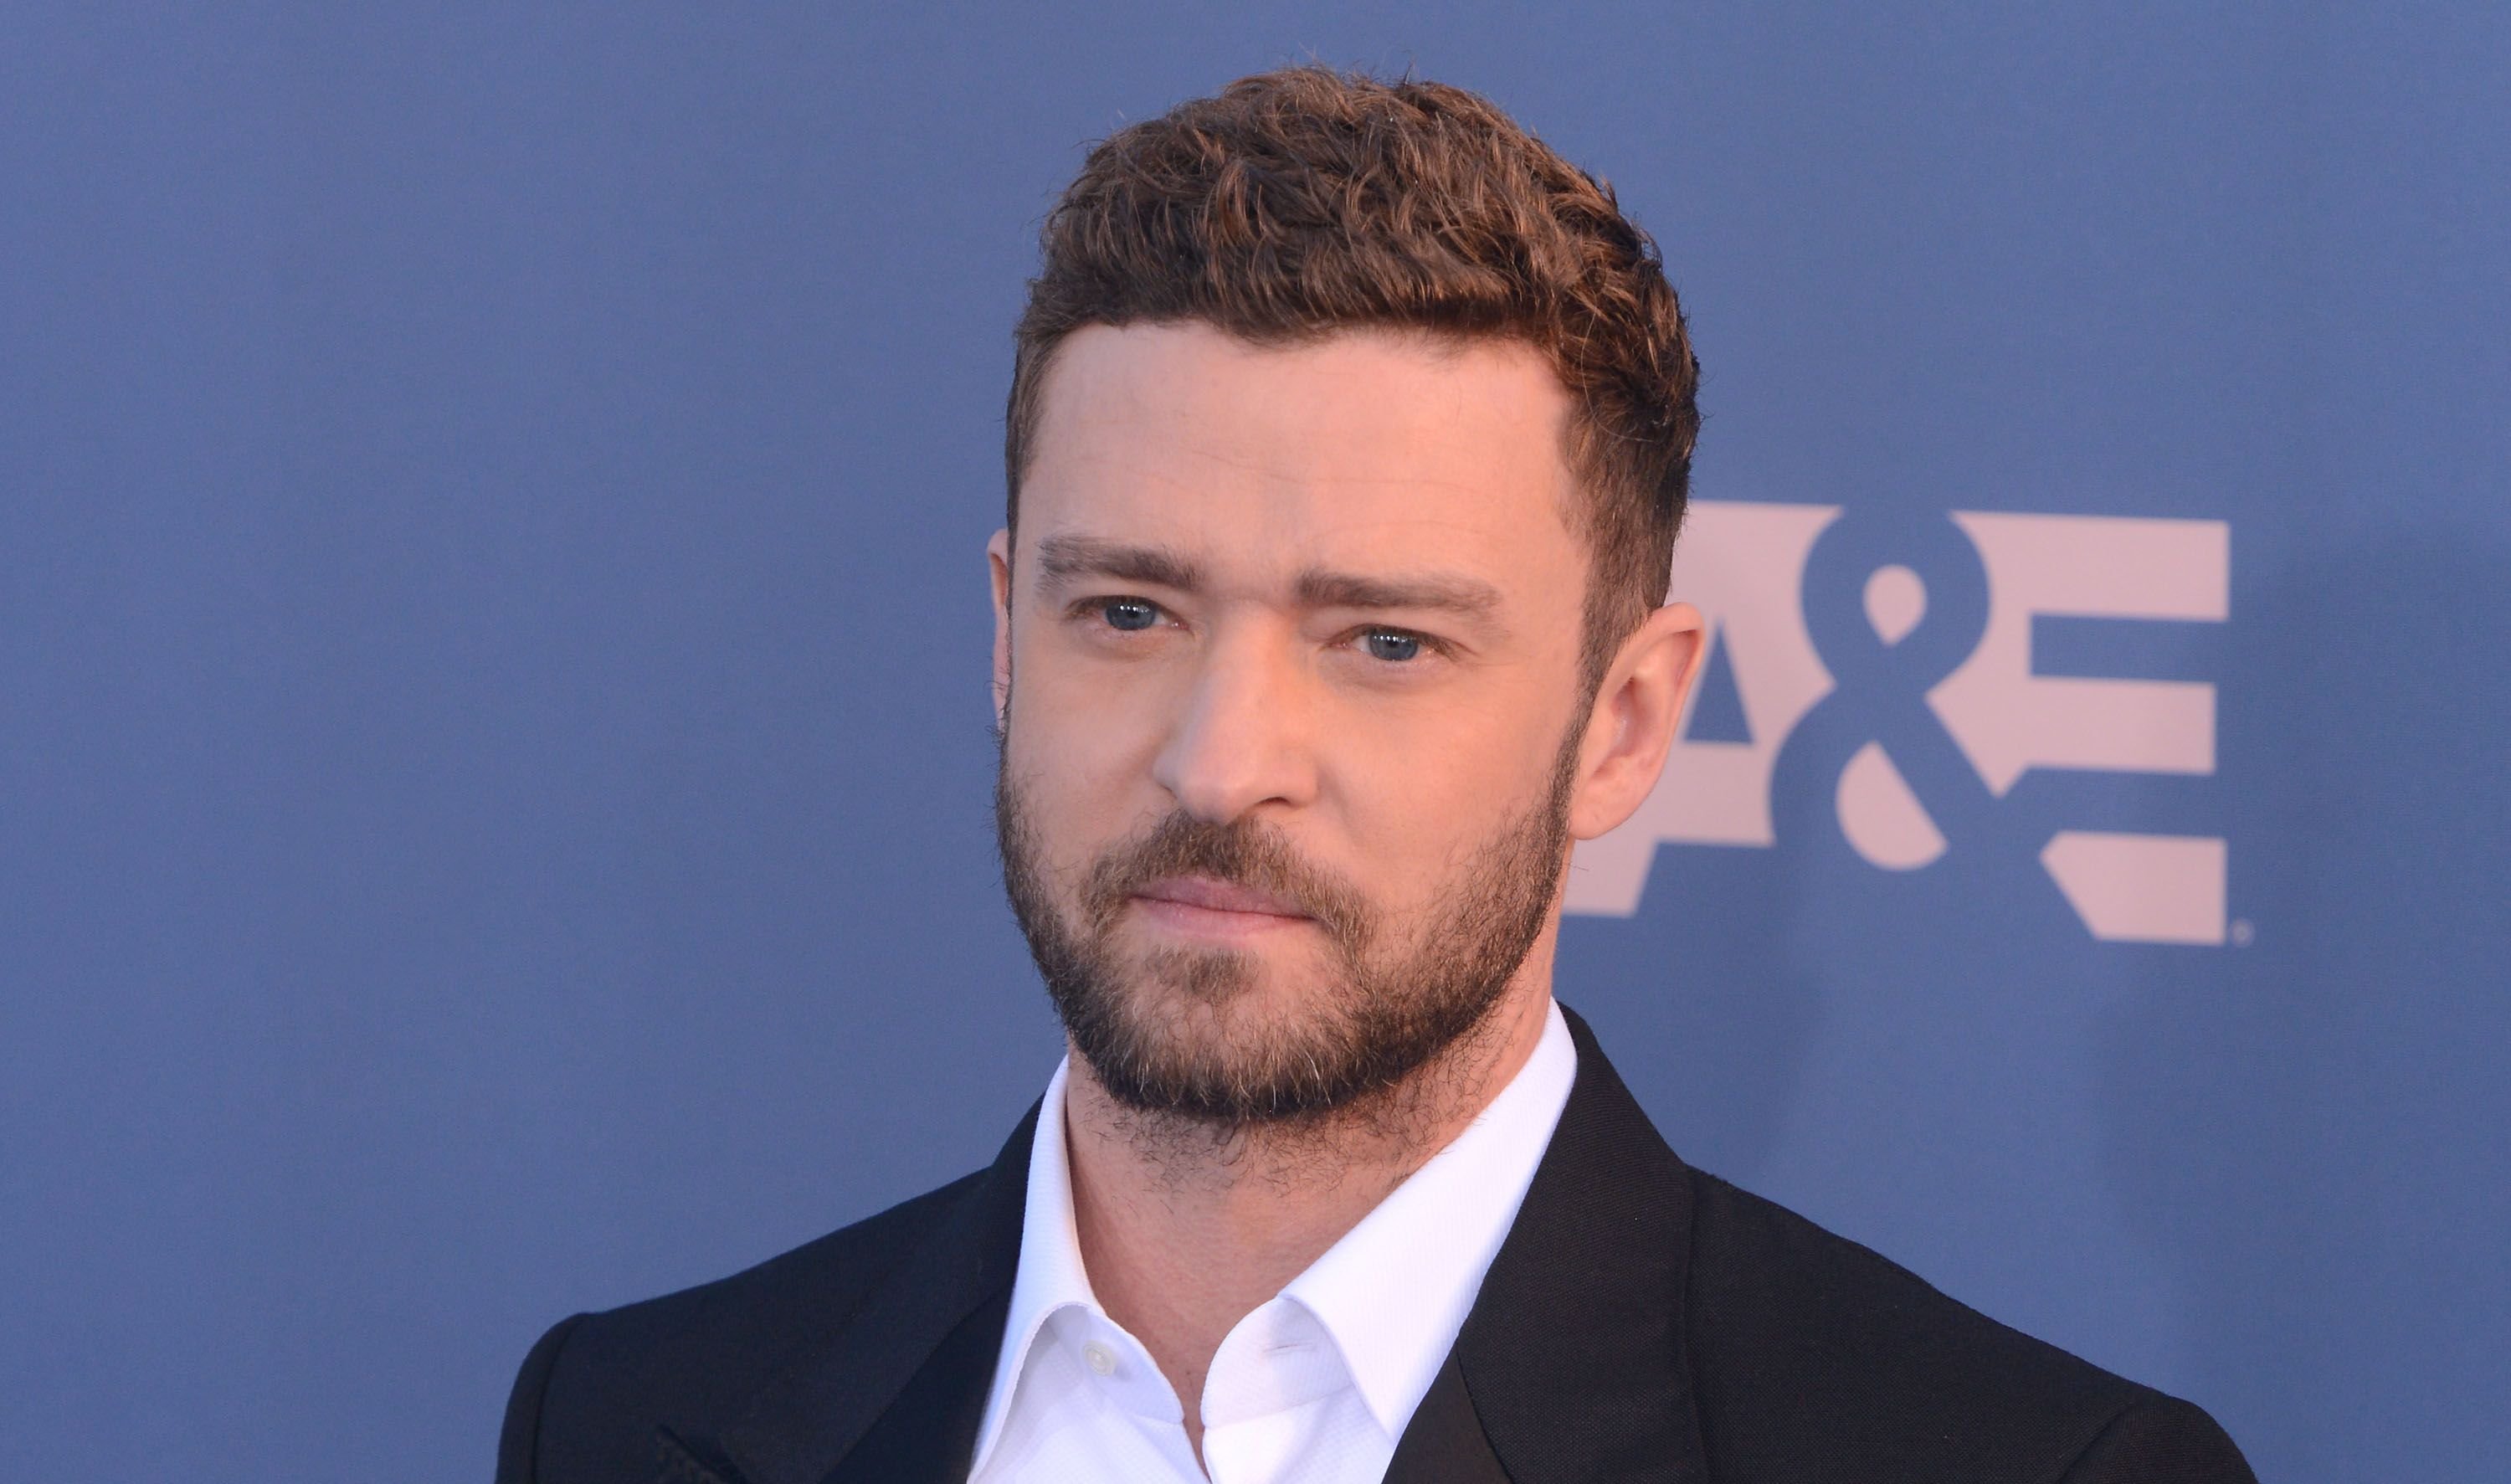 Justin Timberlake at The 22nd Annual Critics' Choice Awards at Barker Hangar on December 11, 2016 | Photo: Getty Images